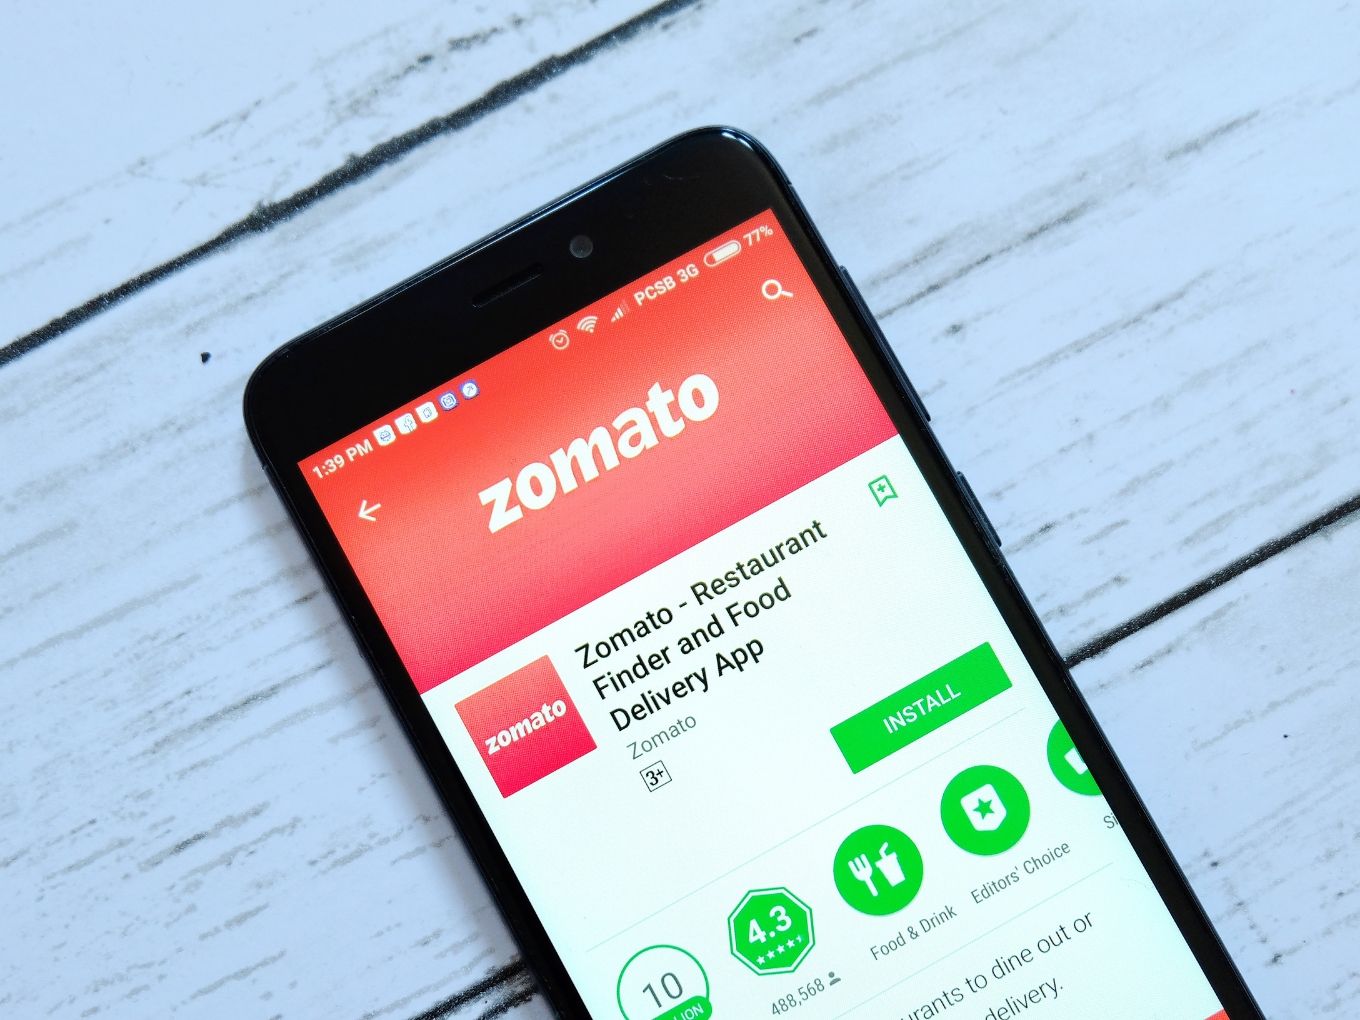 Zomato Responds To #LogOut Campaign As Restaurants Call For Fewer Discounts